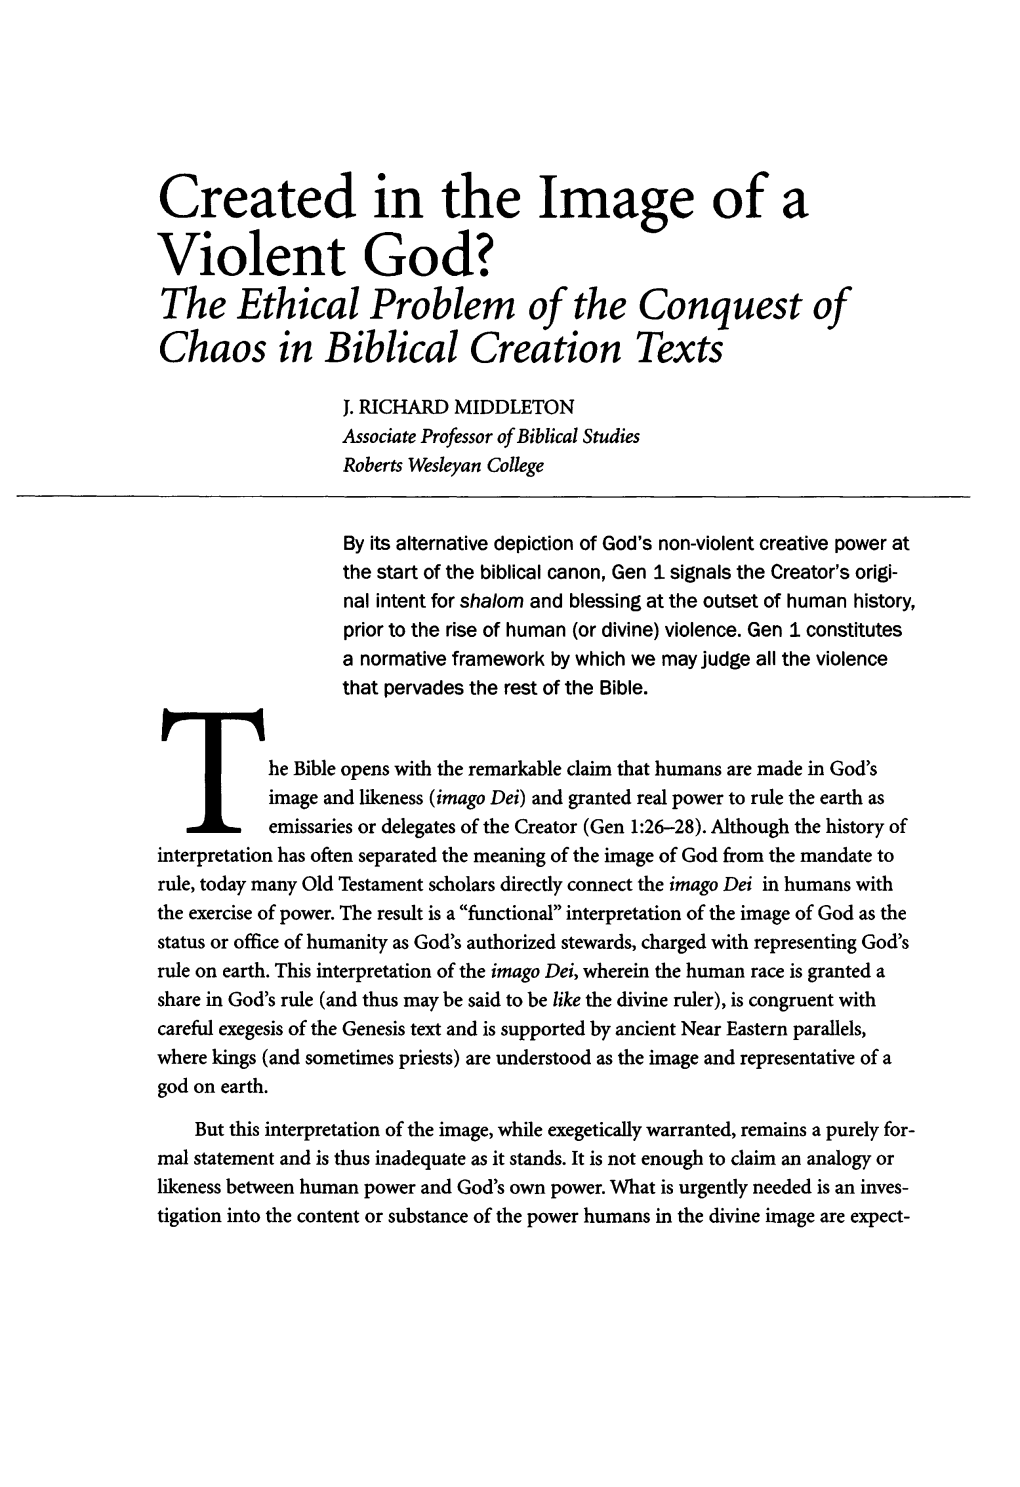 Created in the Image of a Violent God? the Ethical Problem of the Conquest of Chaos in Biblical Creation Texts